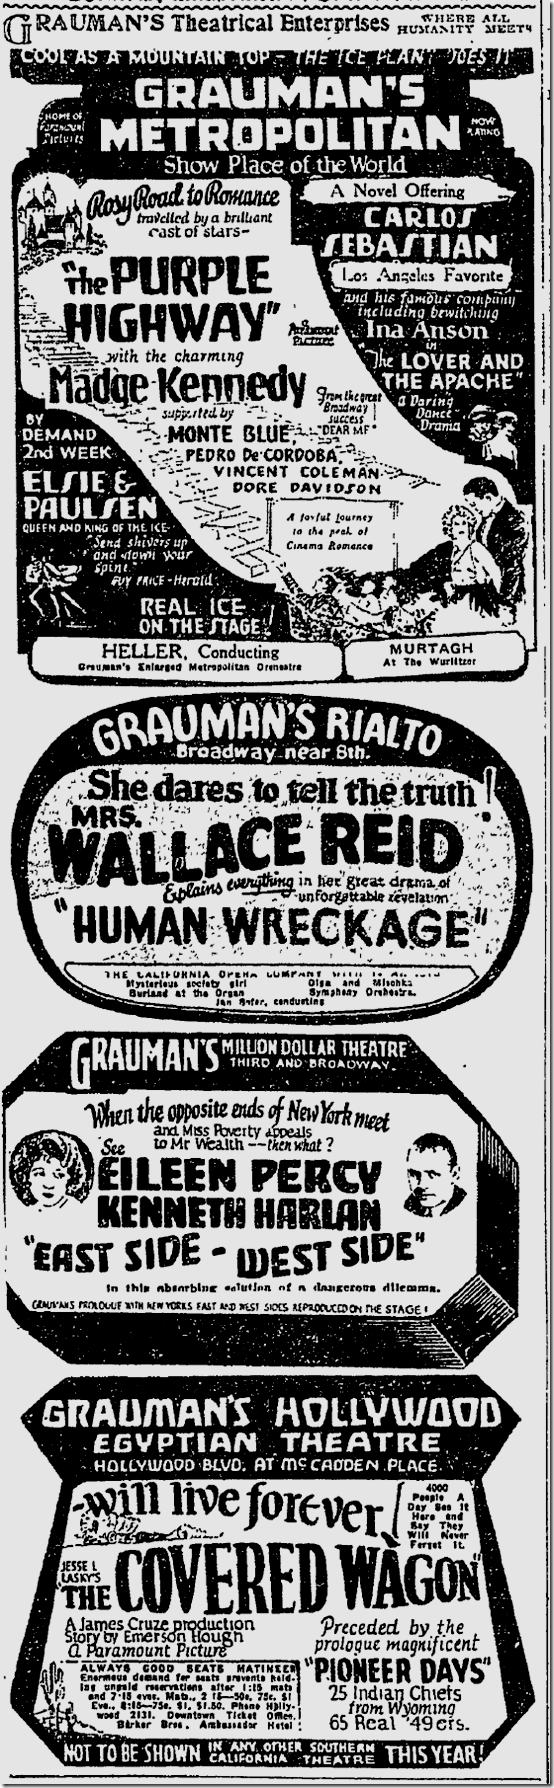 July 23, 1923, Theaters 